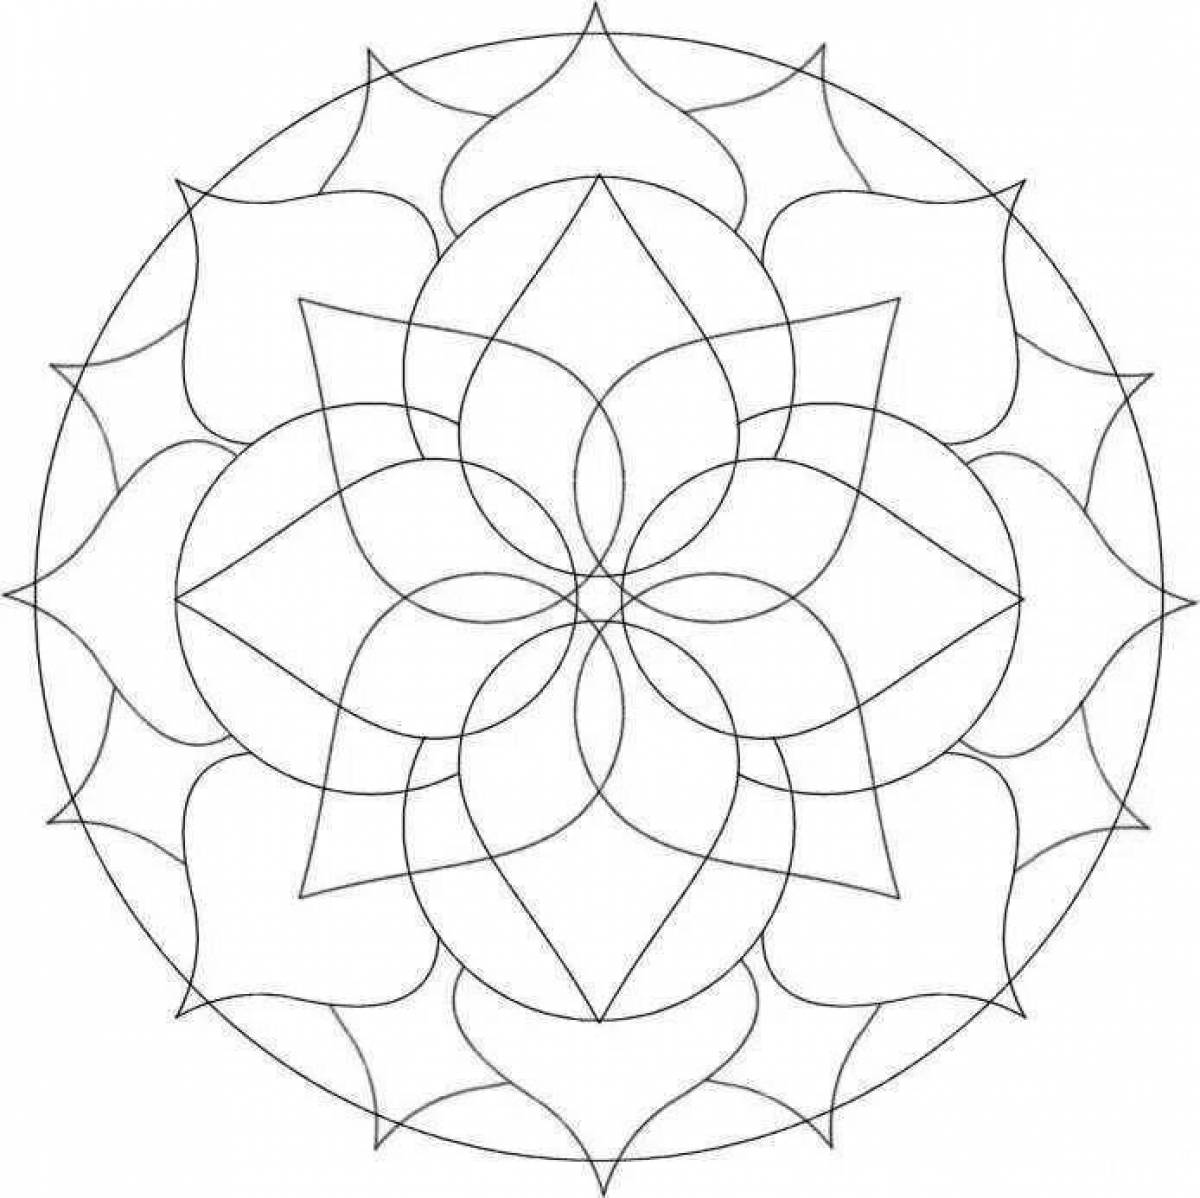 Exquisite coloring flower of life